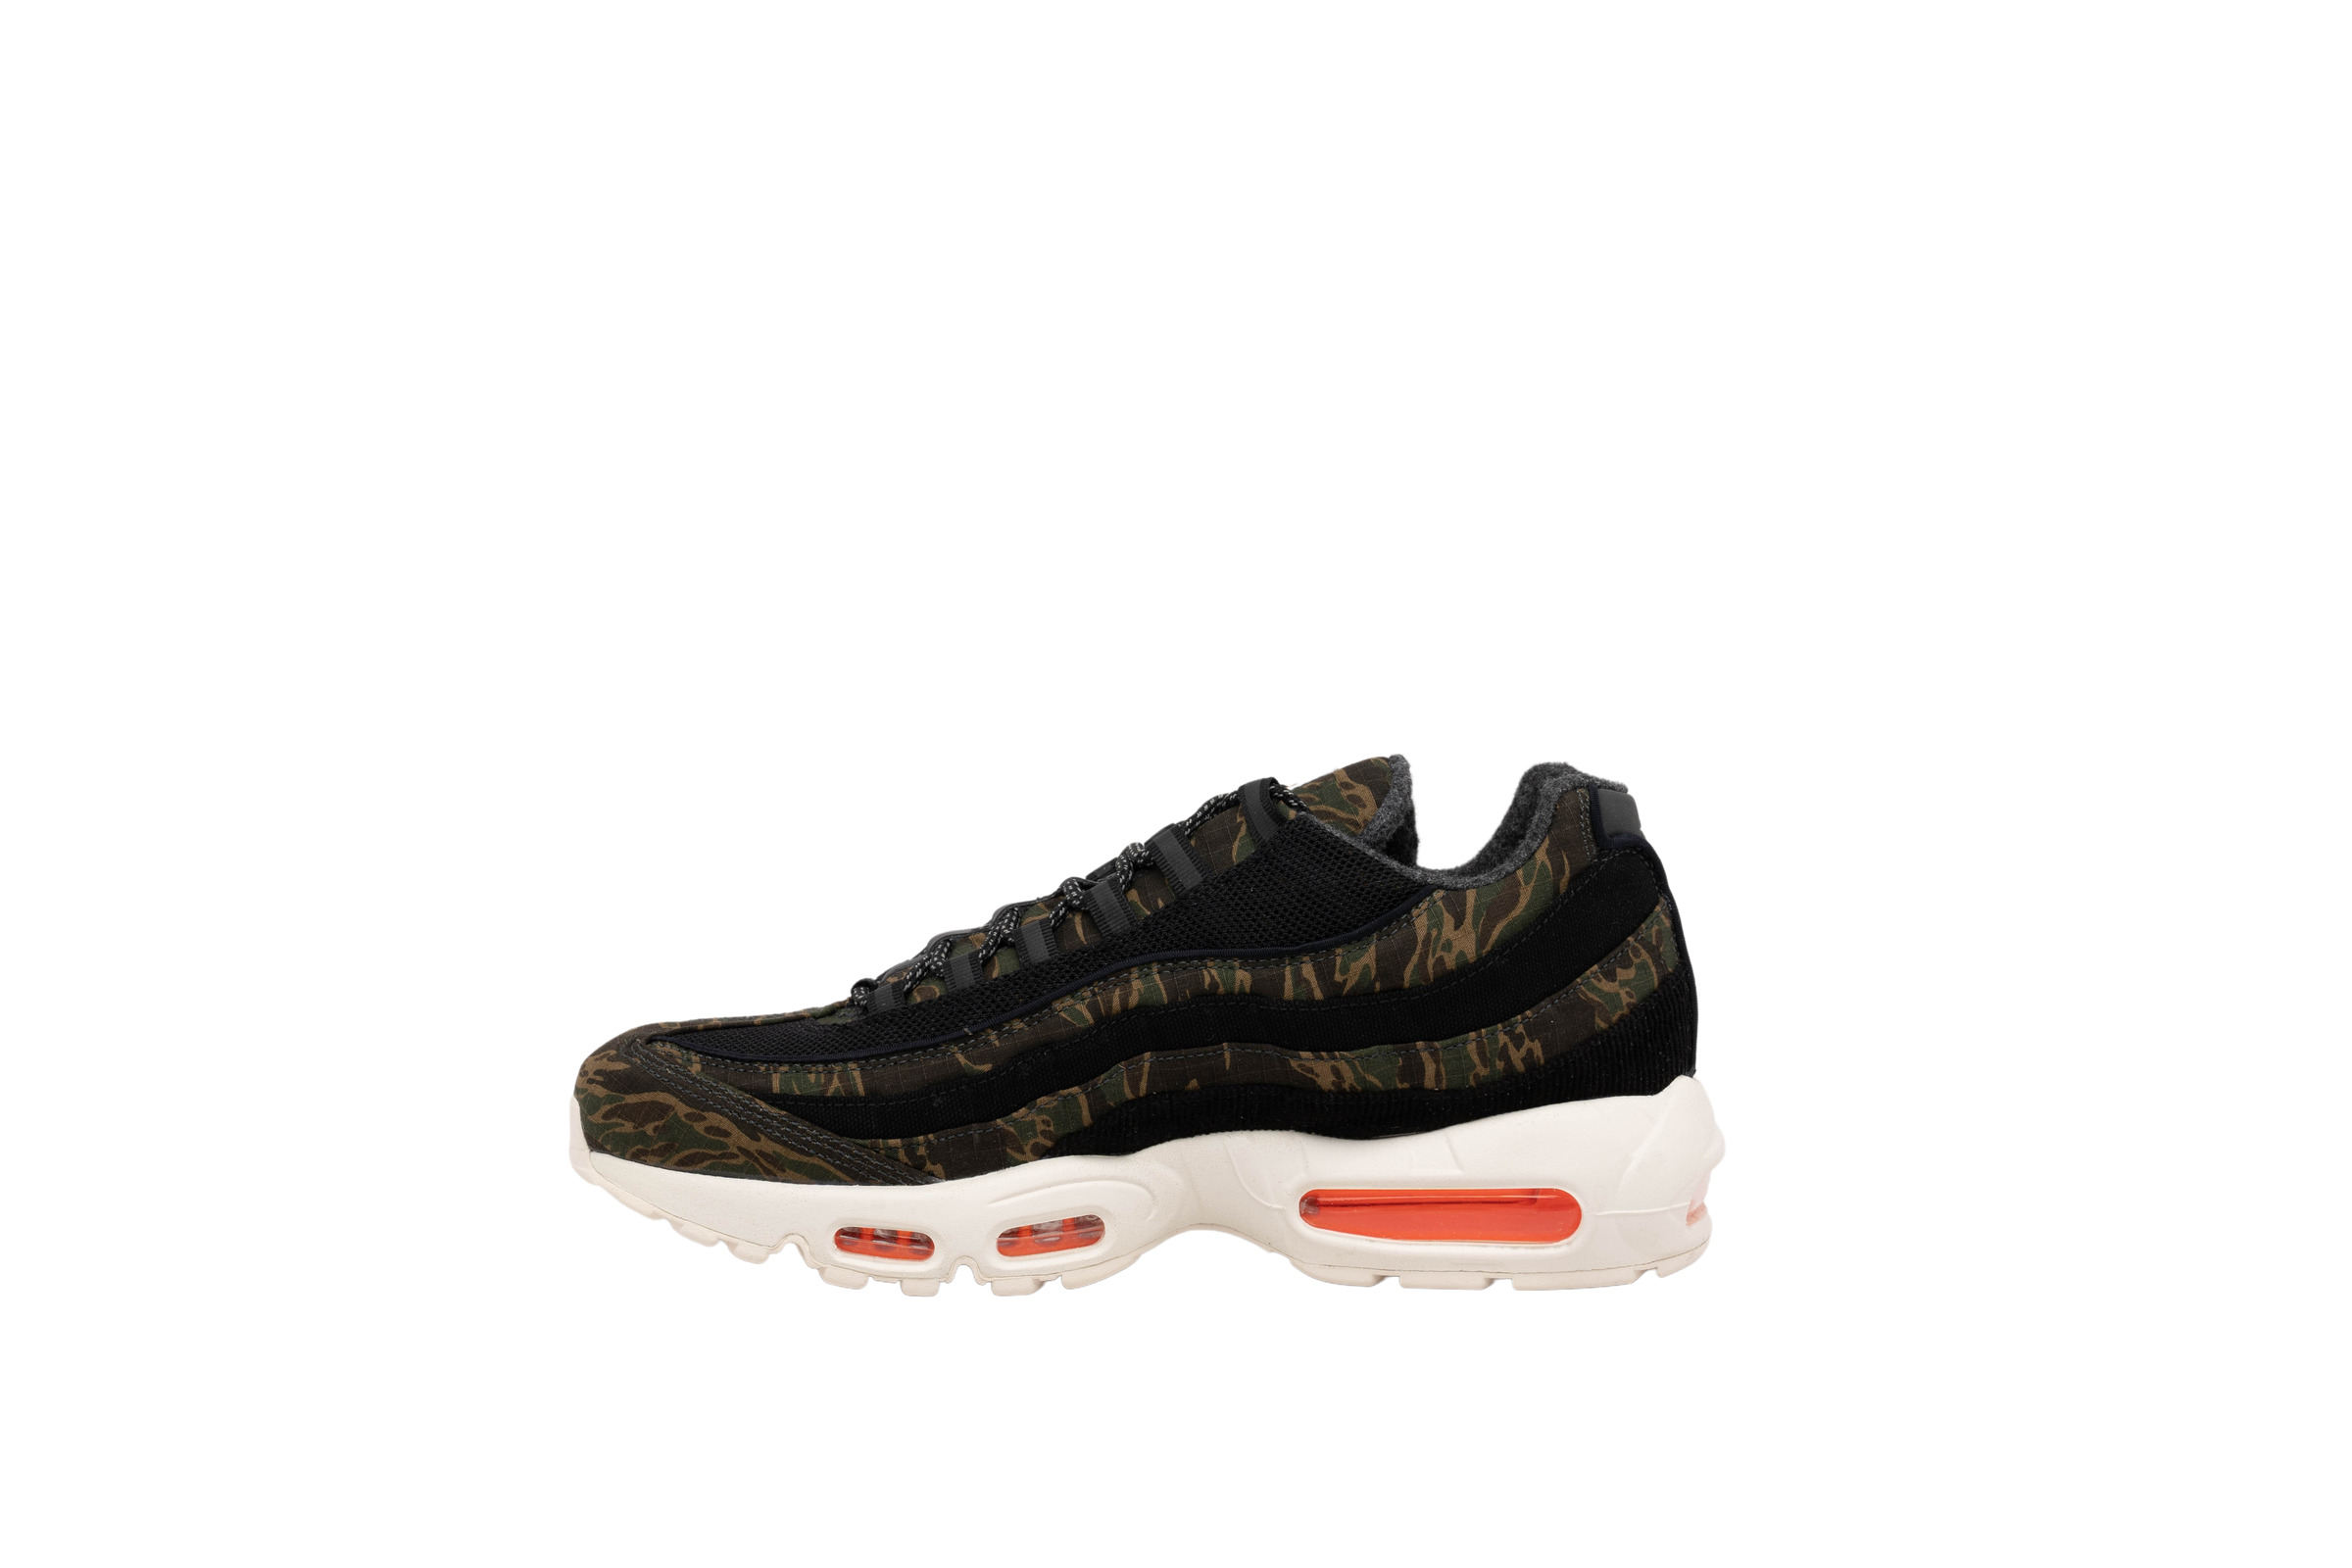 Nike Air Max 95 x Carhartt WIP Camo 2018 for Sale | Authenticity